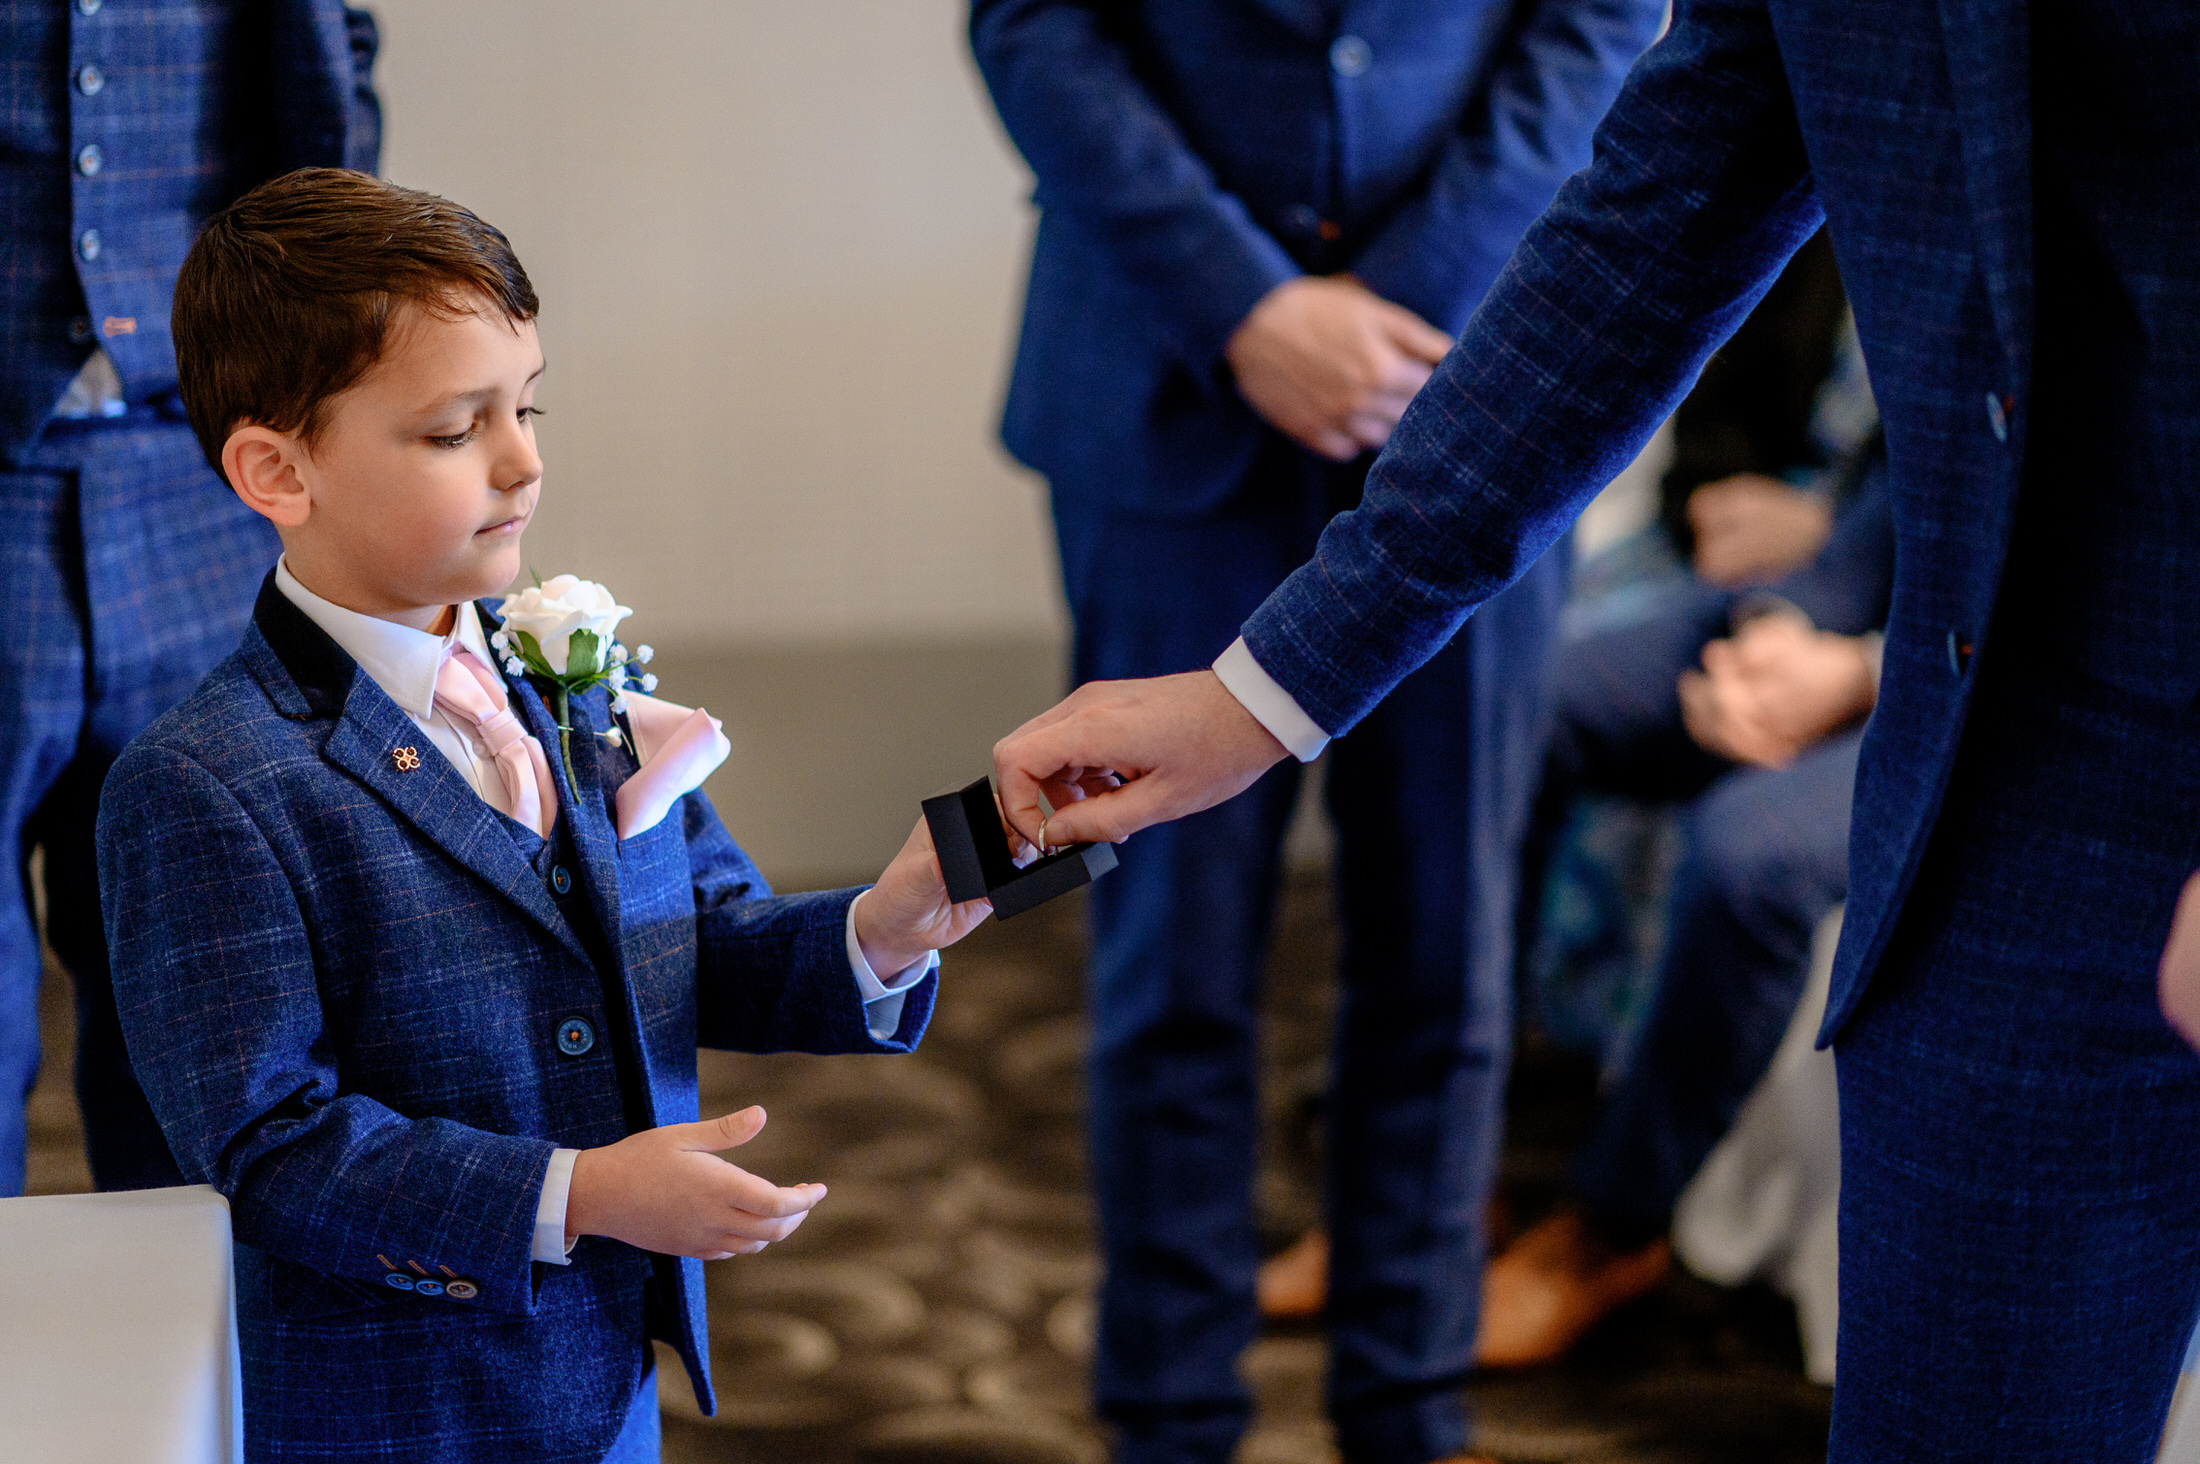 At the elegant Brackenborough Hotel, a young boy in a blue suit is joyfully holding a wedding ring.